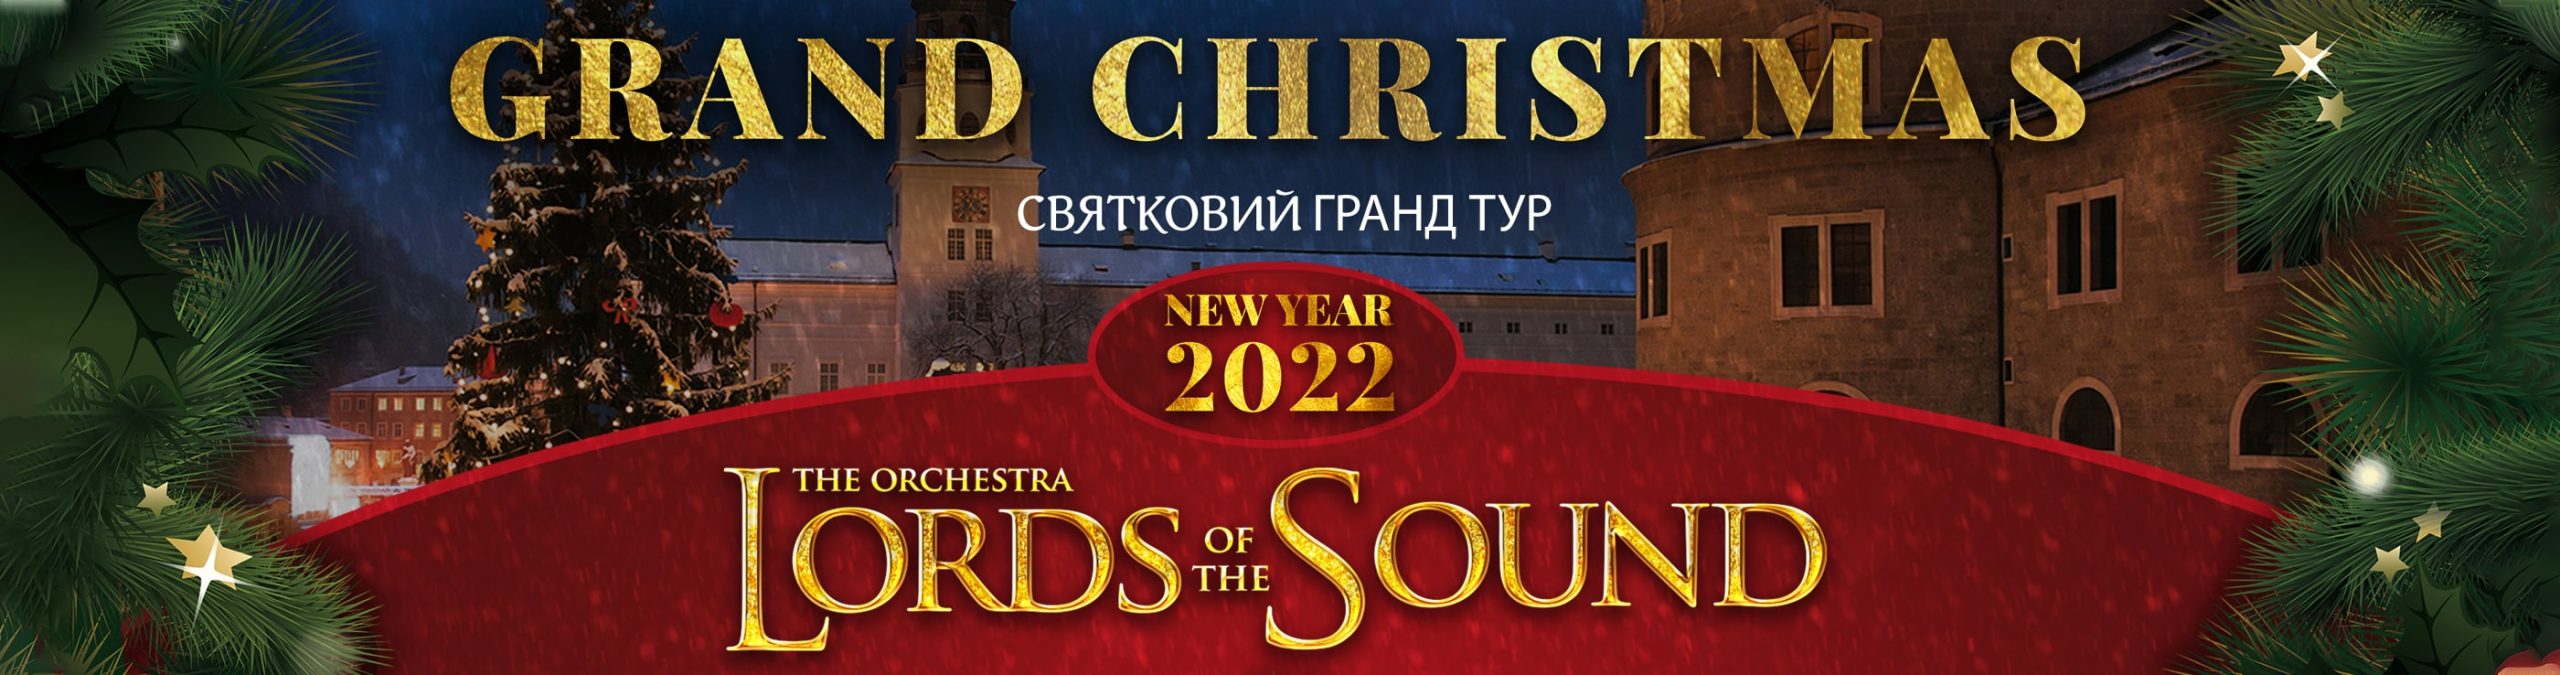 LORDS OF THE SOUND. GRAND CHRISTMAS TOUR 2021-2022